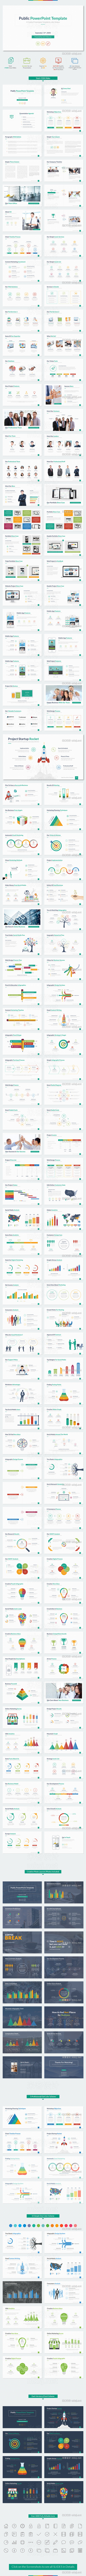 PPT模板 public powerpoint template